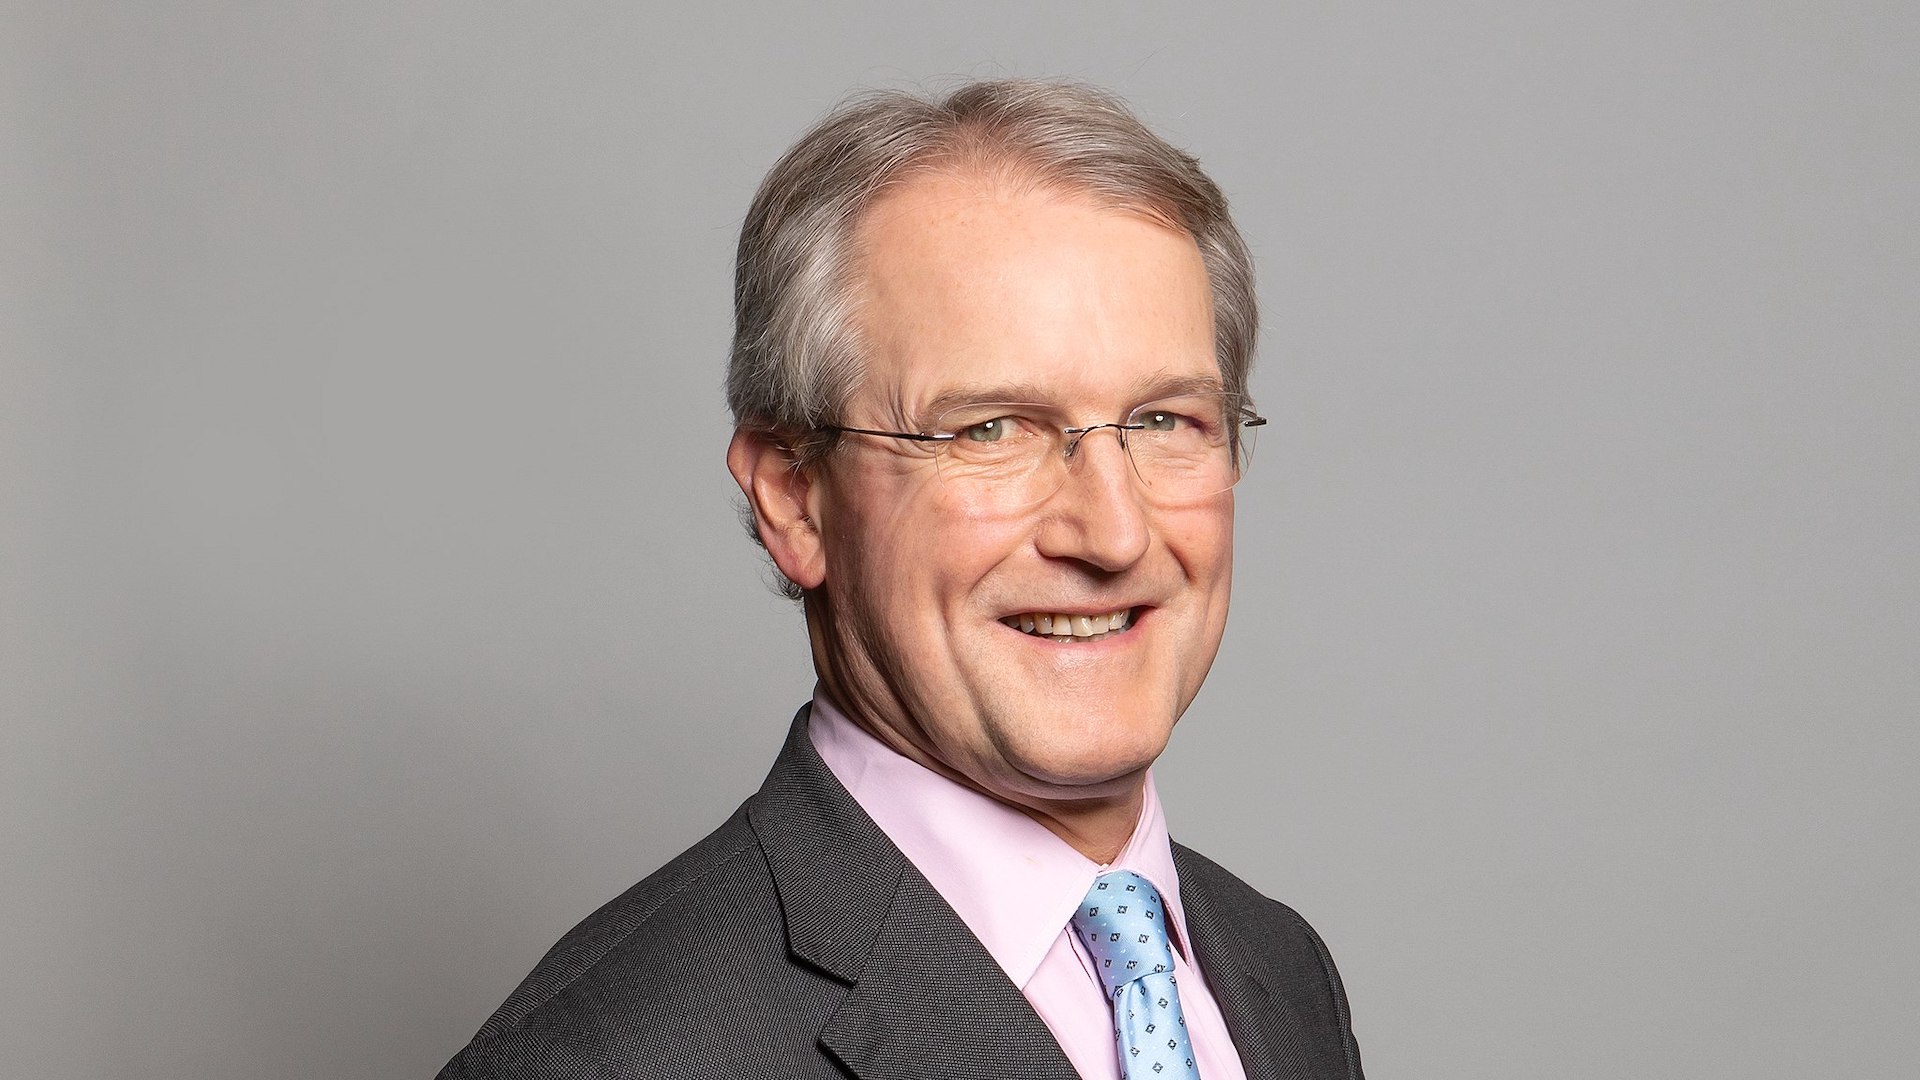 Owen Paterson's official portrait, wearing glasses a pink tie and blue shirt